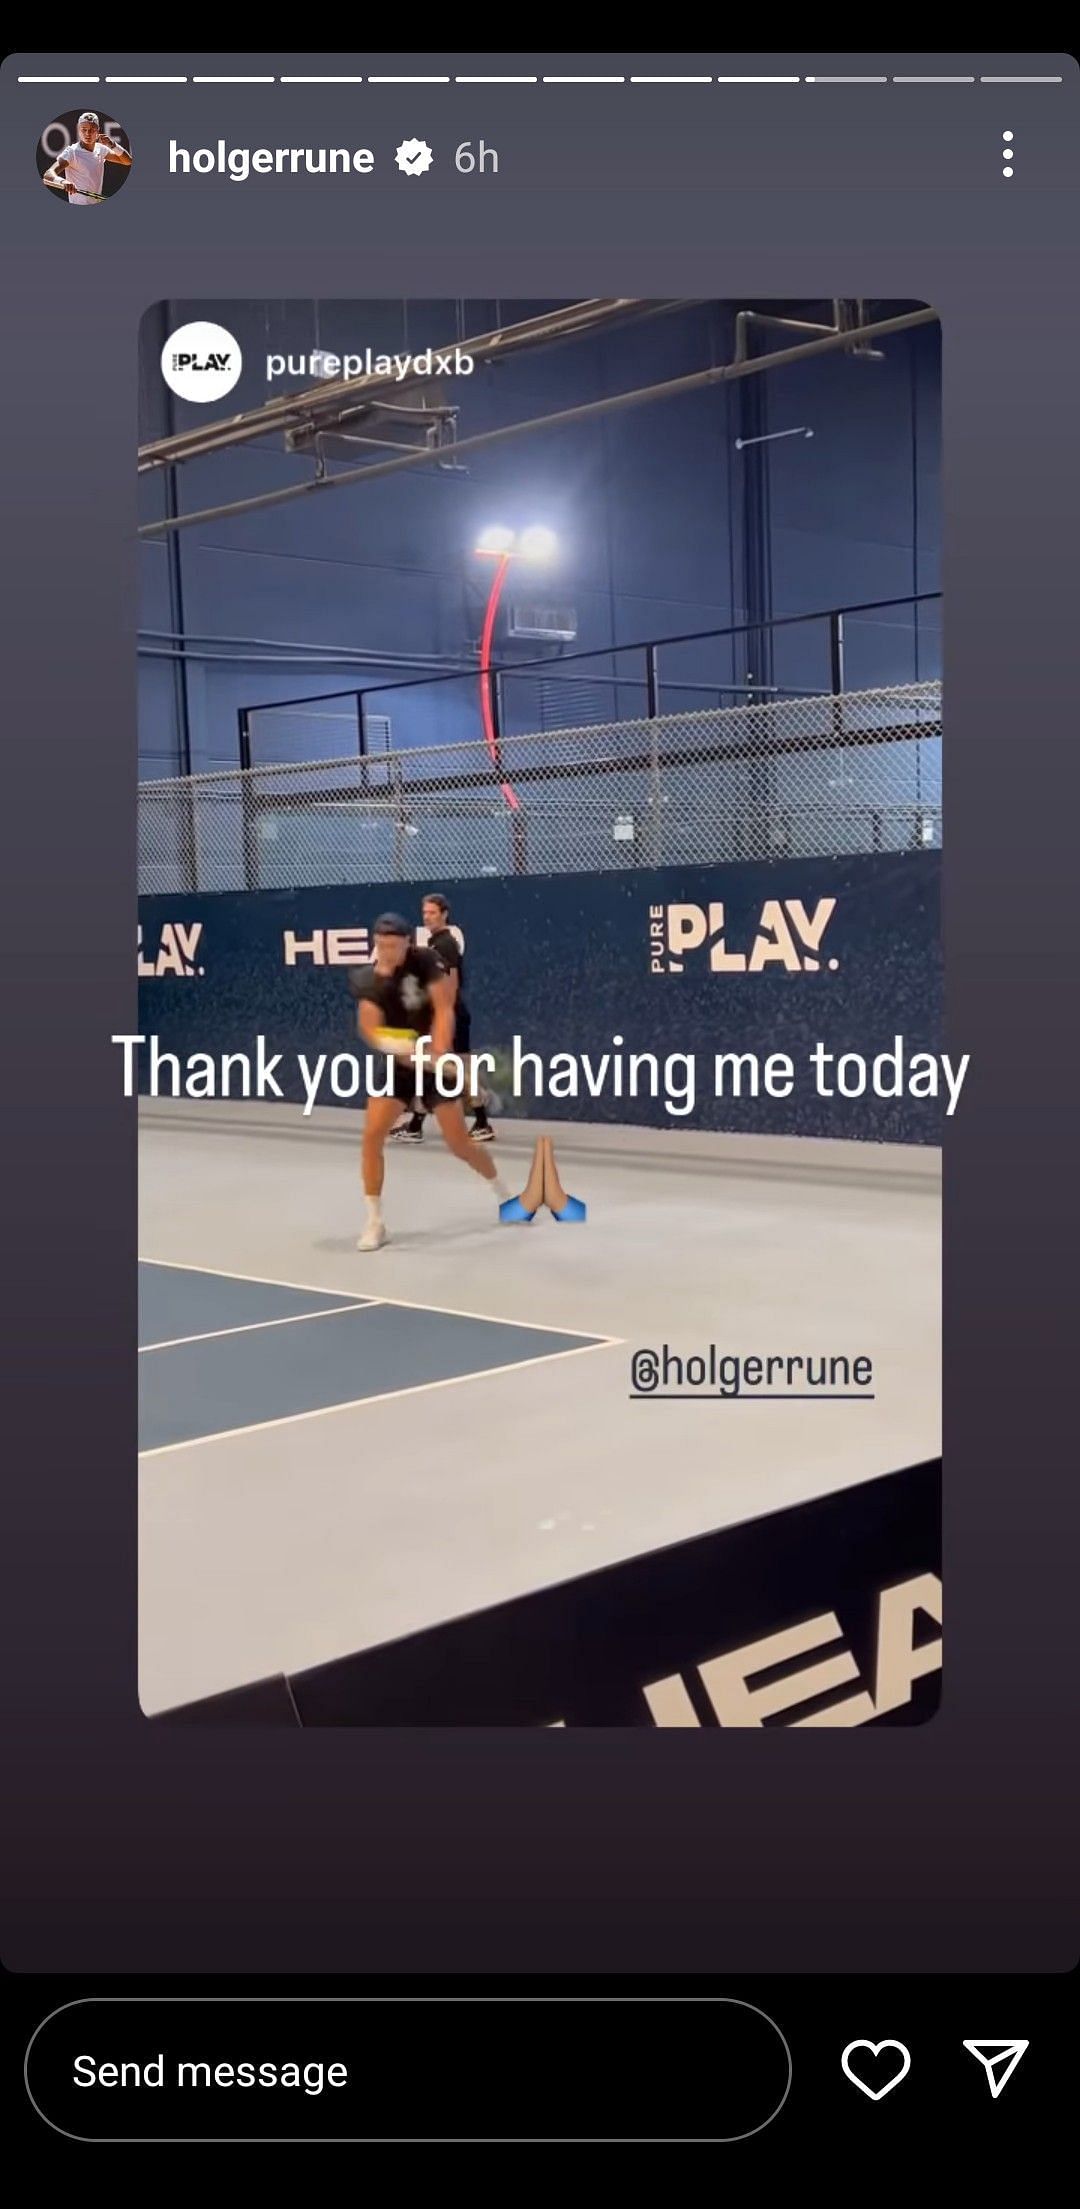 Holger Rune credits the organizers on Instagram for inviting him for the session